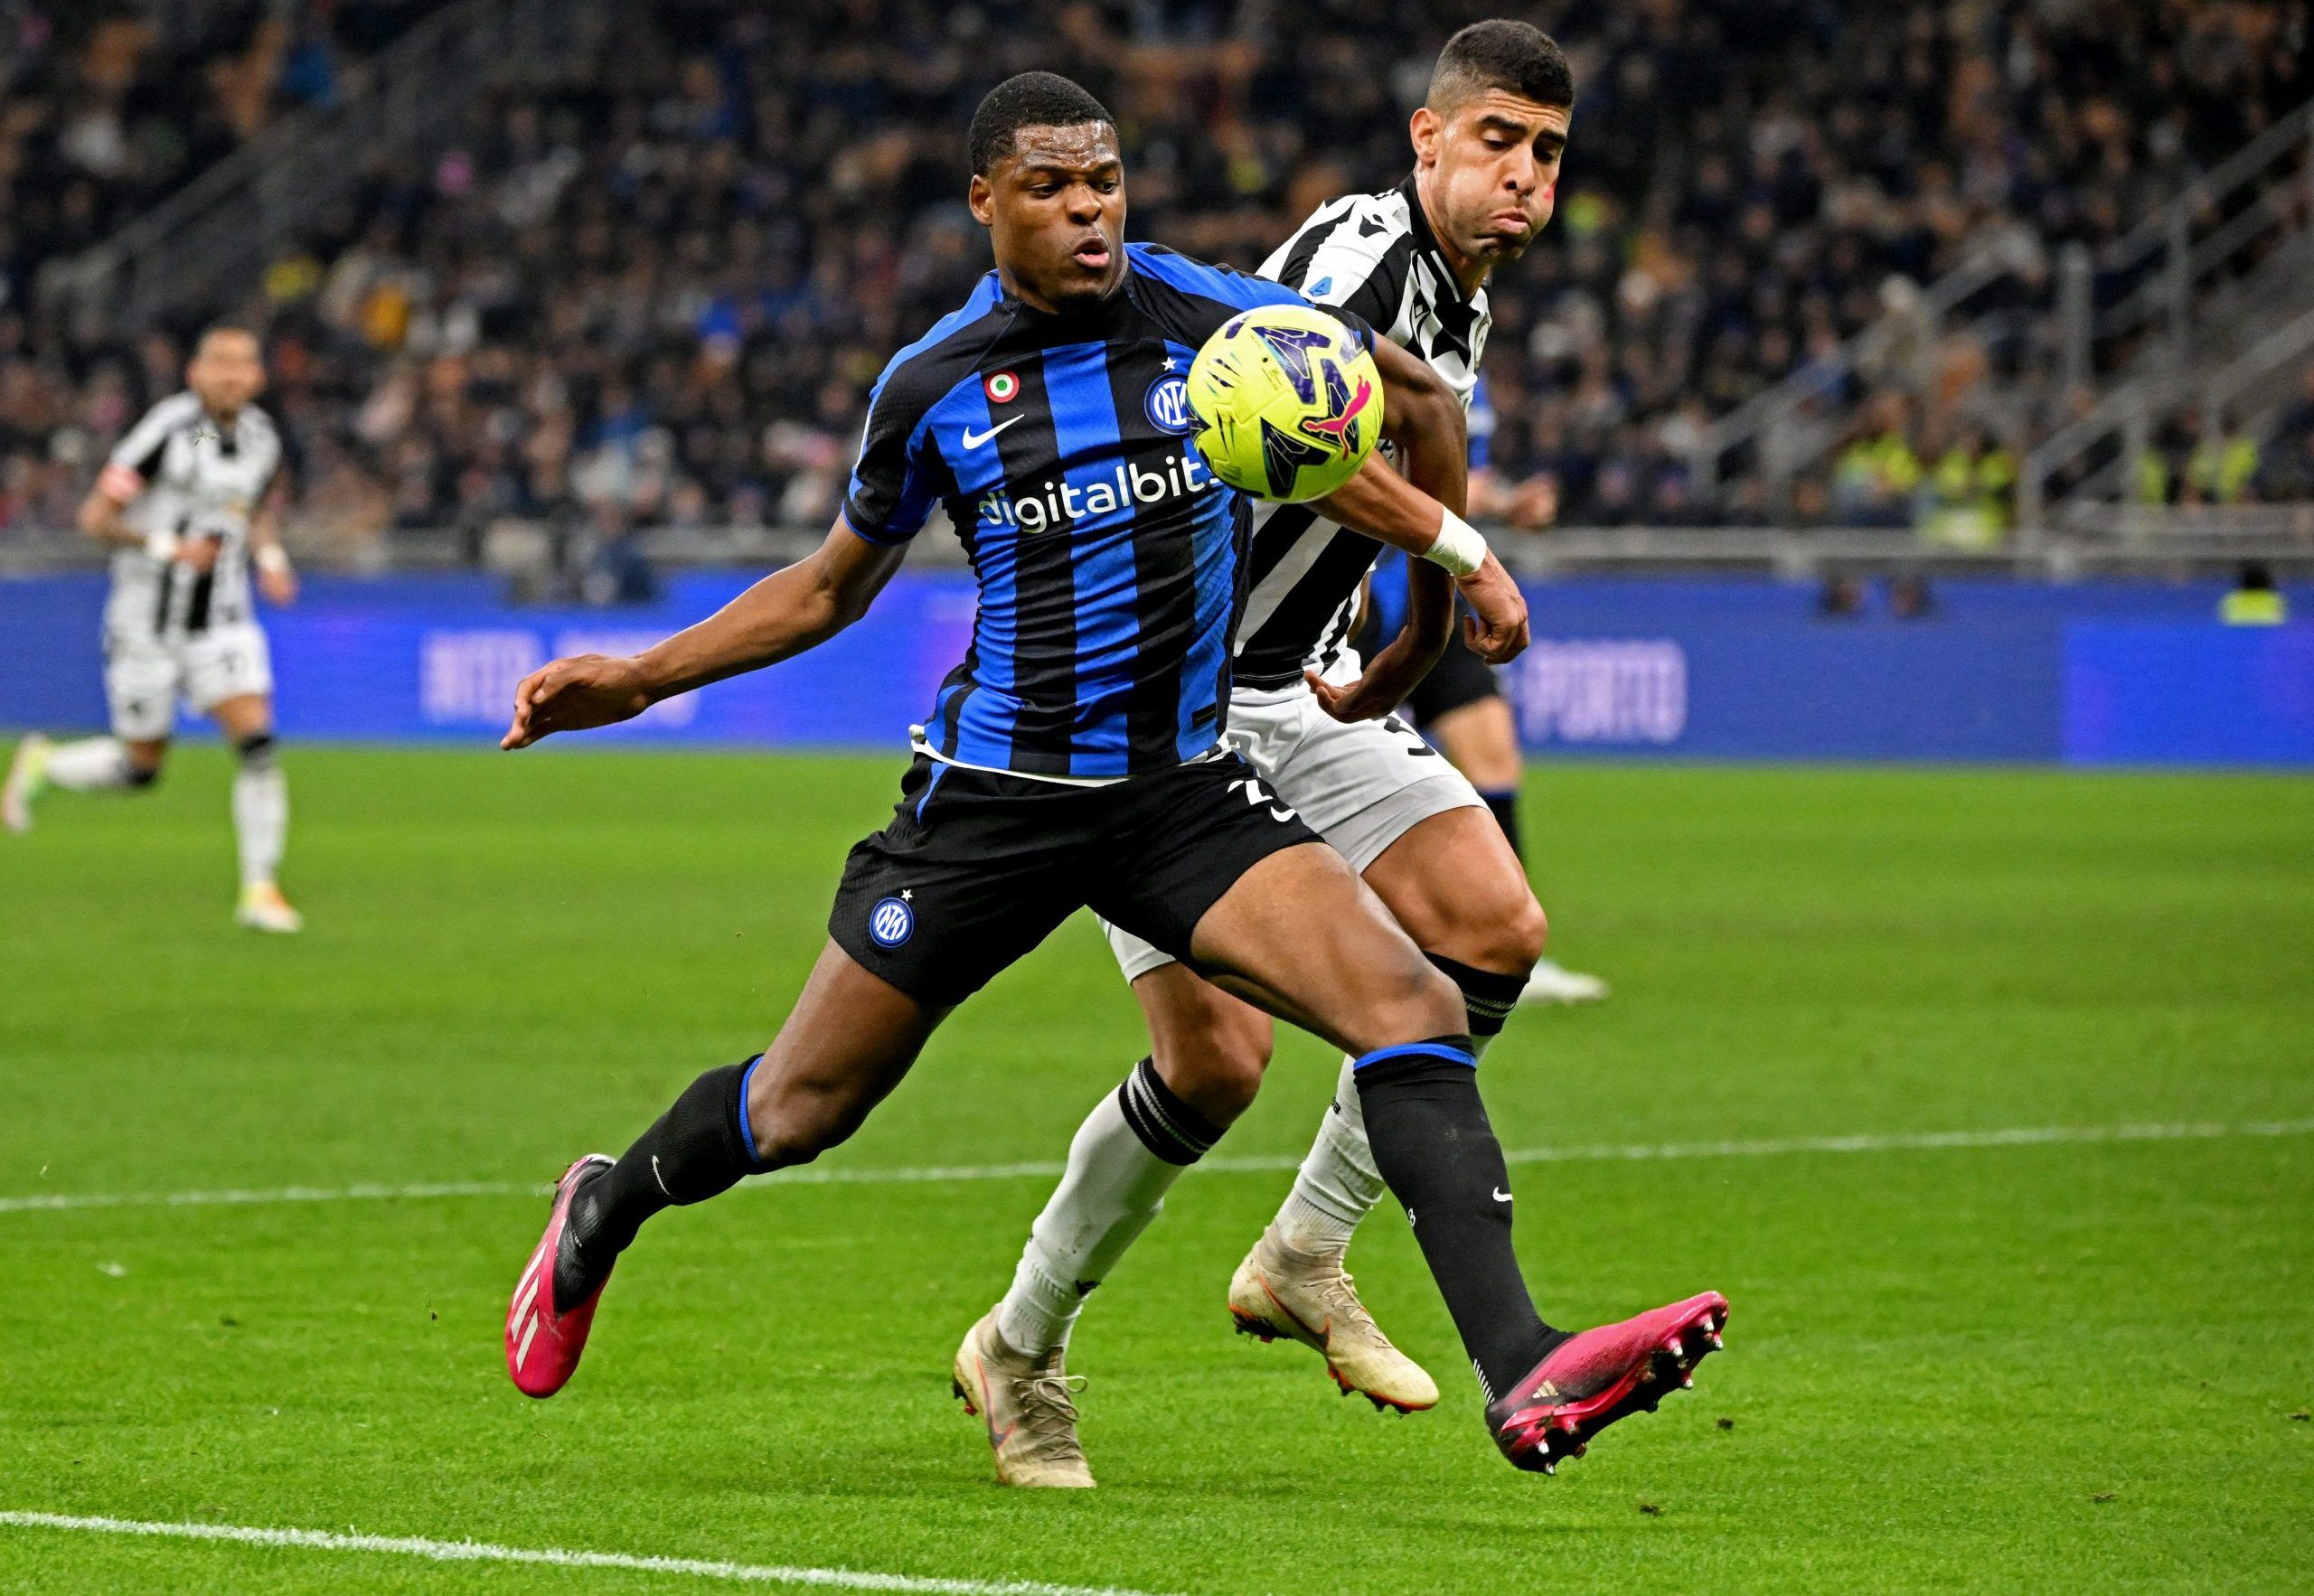 Soccer Football - Serie A - Inter Milan v Udinese - San Siro, Milan, Italy - February 18, 2023 Inter Milan's Denzel Dumfries in action with Udinese's Adam Masina REUTERS/Alberto Lingria